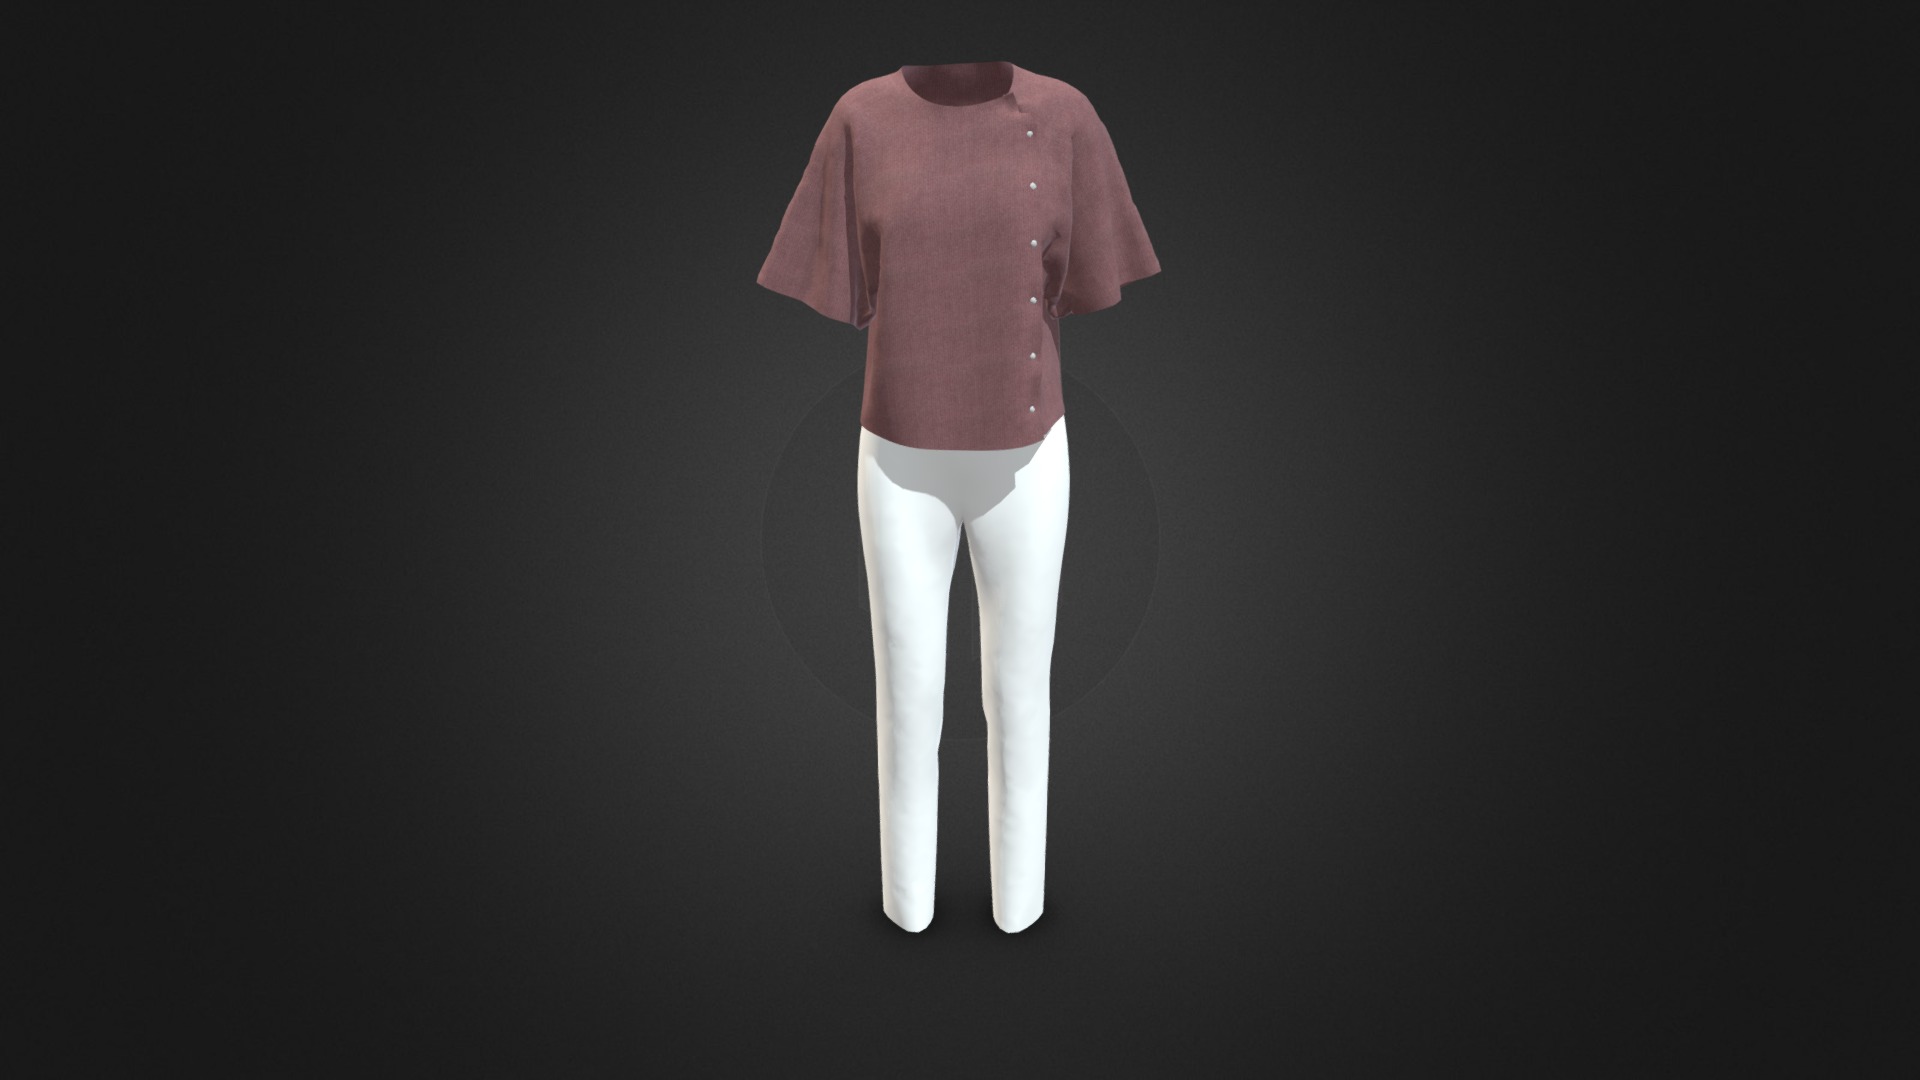 3D model Women’s Cape Short Sleeve T-Shirt - This is a 3D model of the Women's Cape Short Sleeve T-Shirt. The 3D model is about a mannequin wearing a pink shirt and white pants.